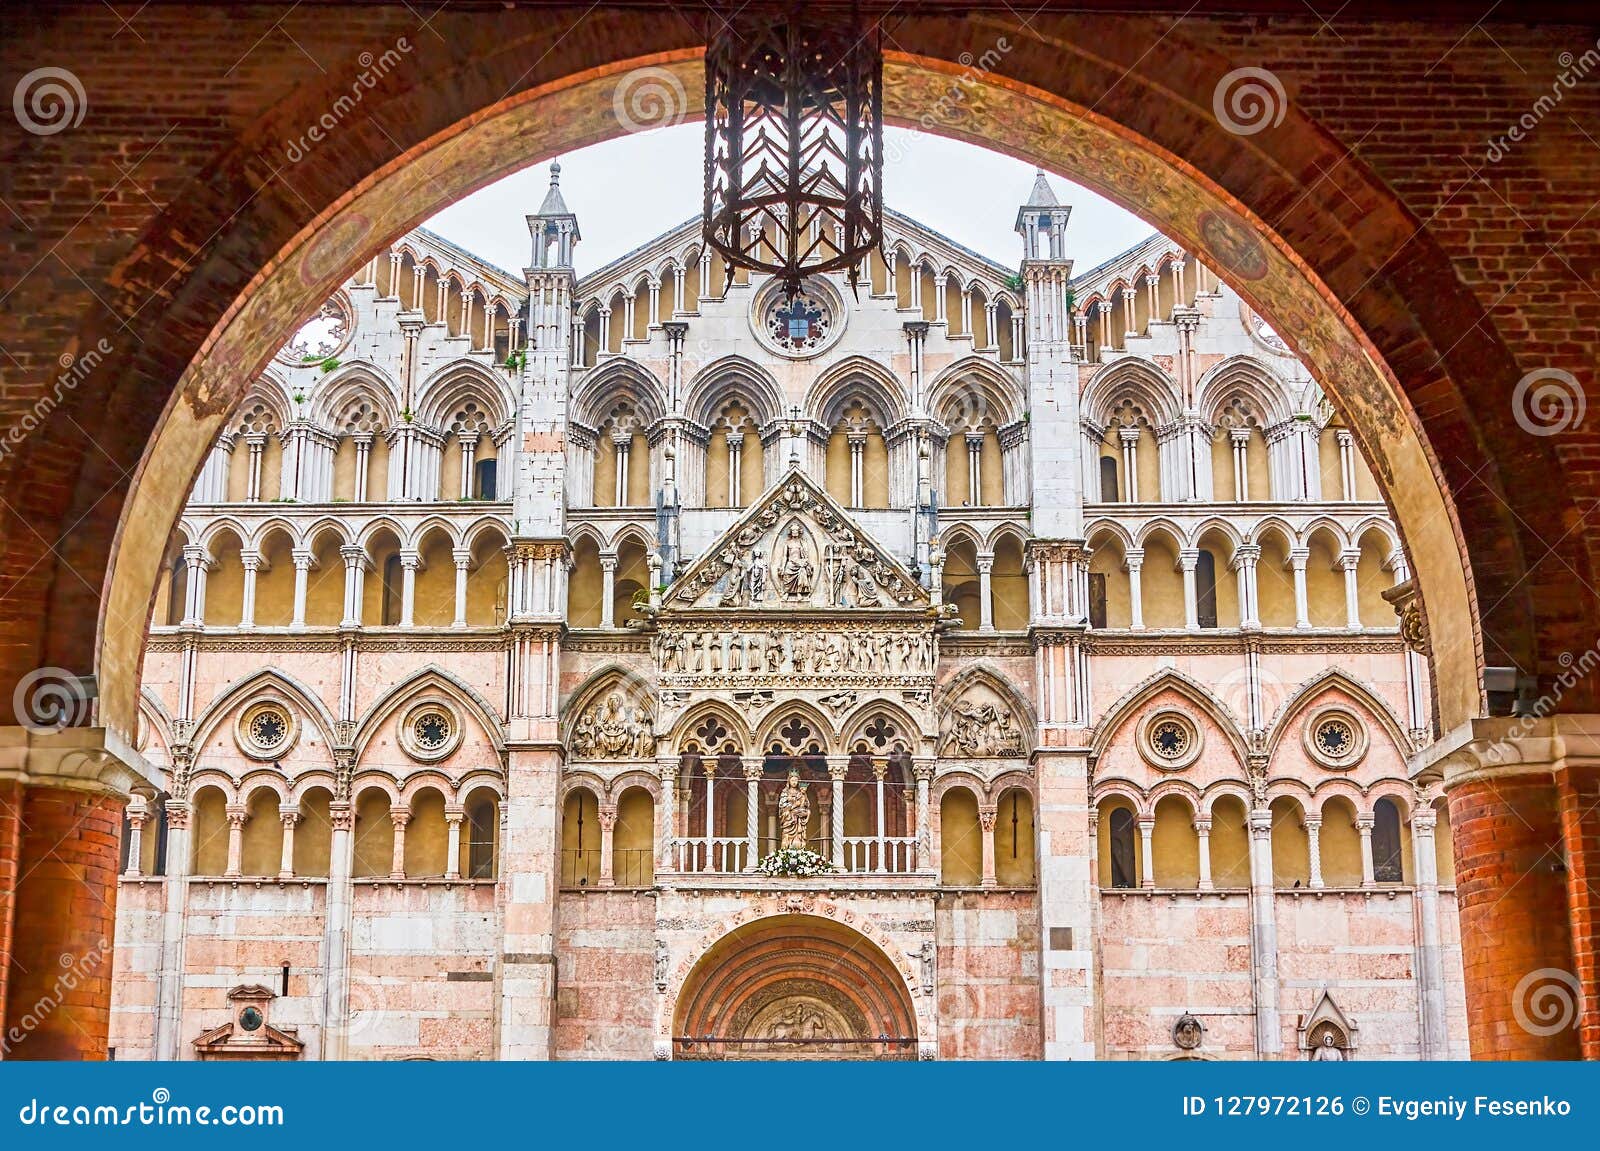 the view on the frontage of ferrara cathedral, italy